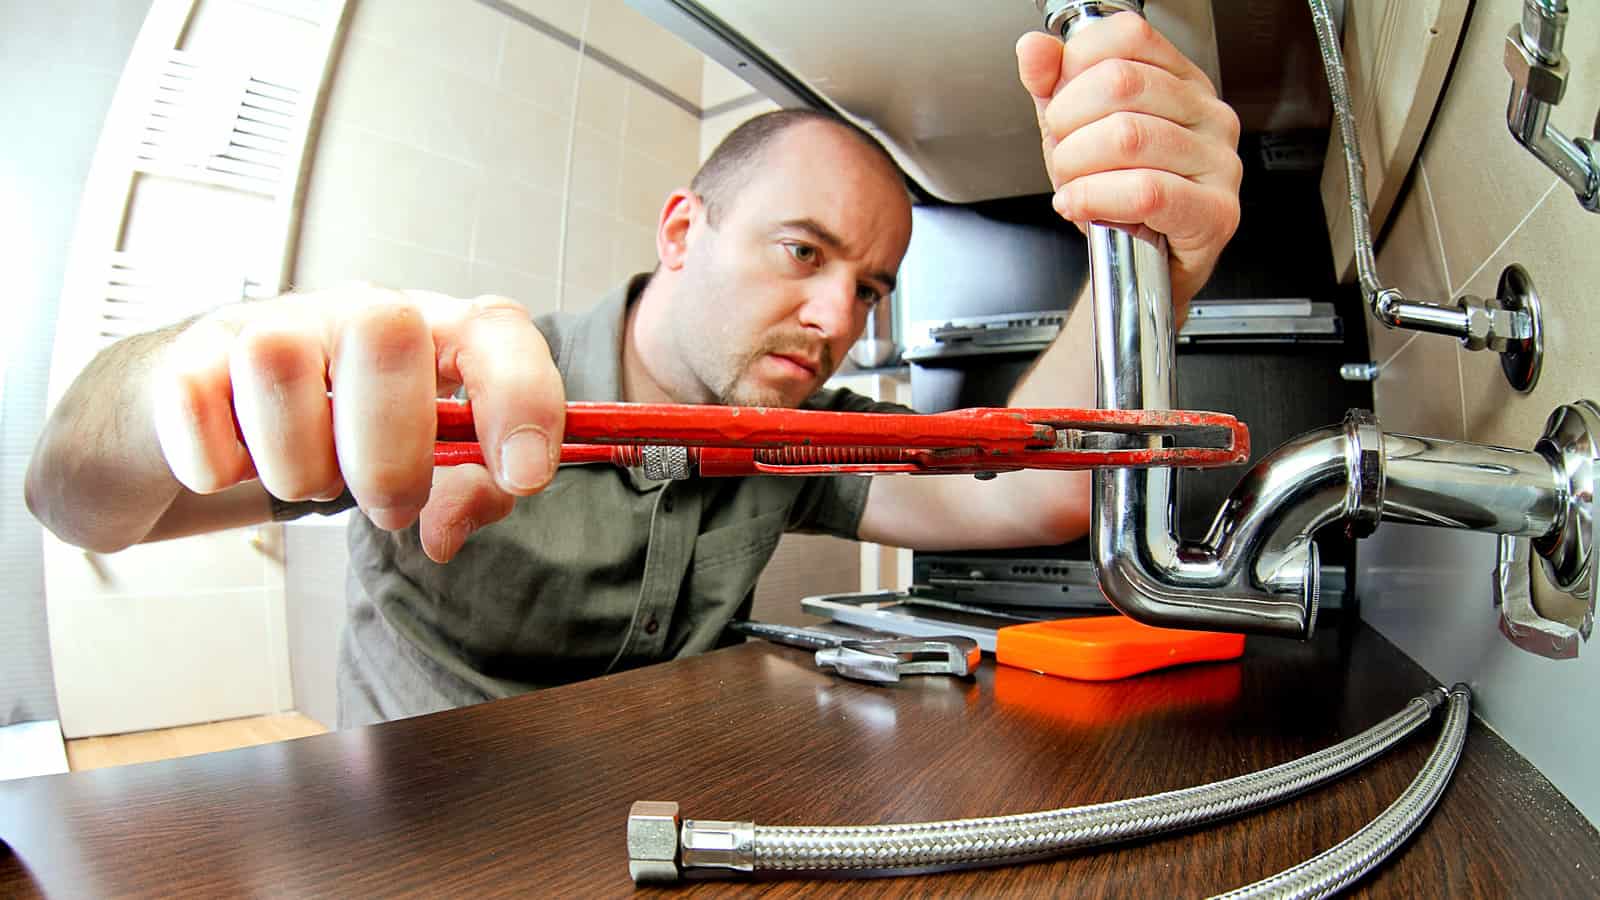 Dick Ray Master Plumber Heating and Cooling of Overland Park